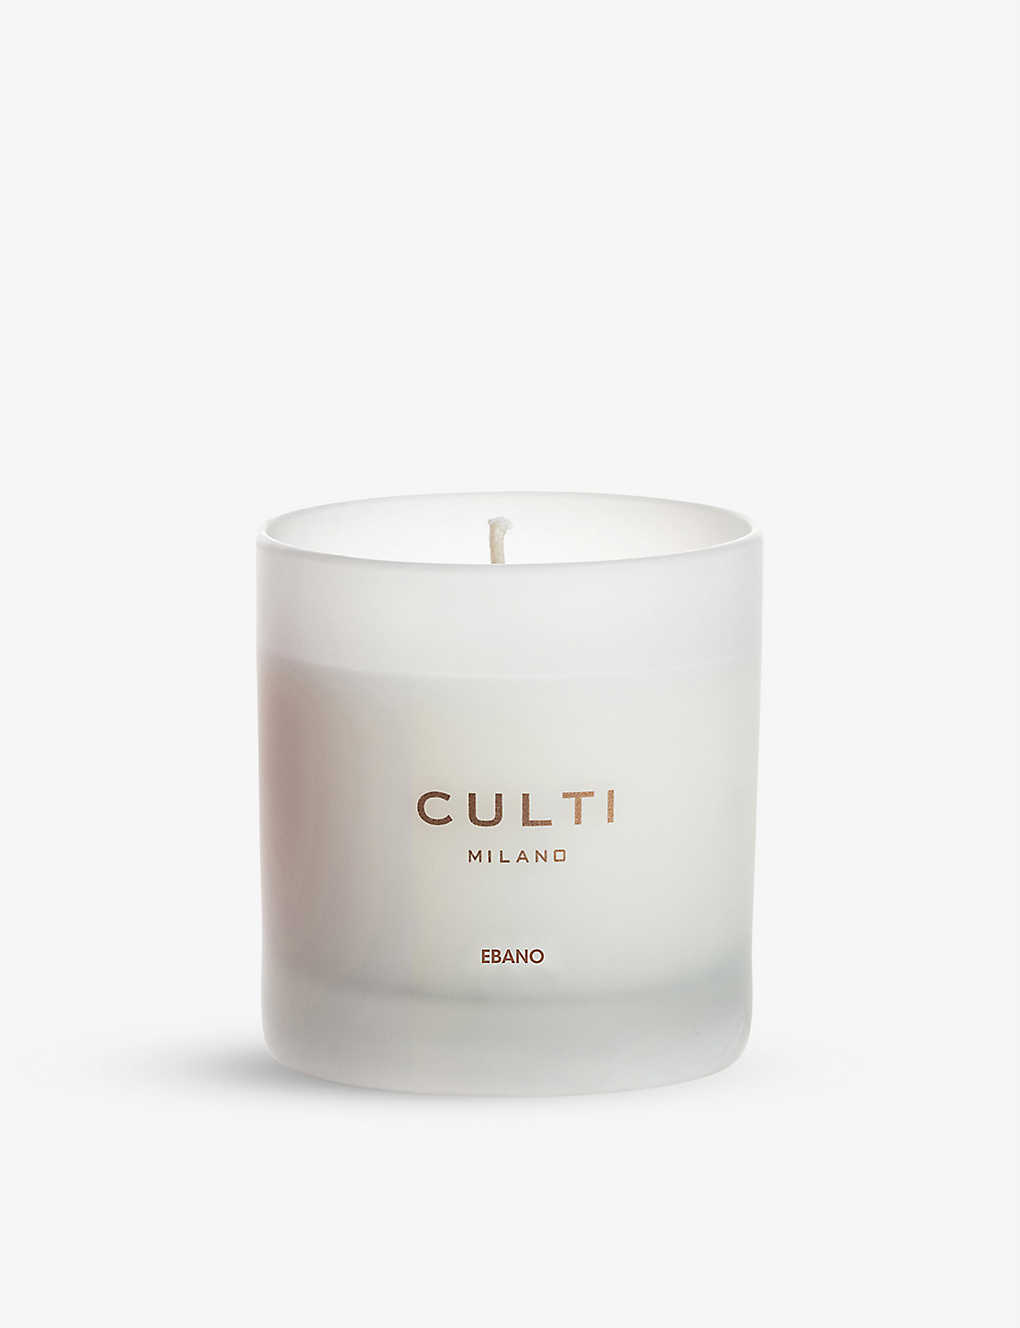 Culti Ebano Scented Candle 270g